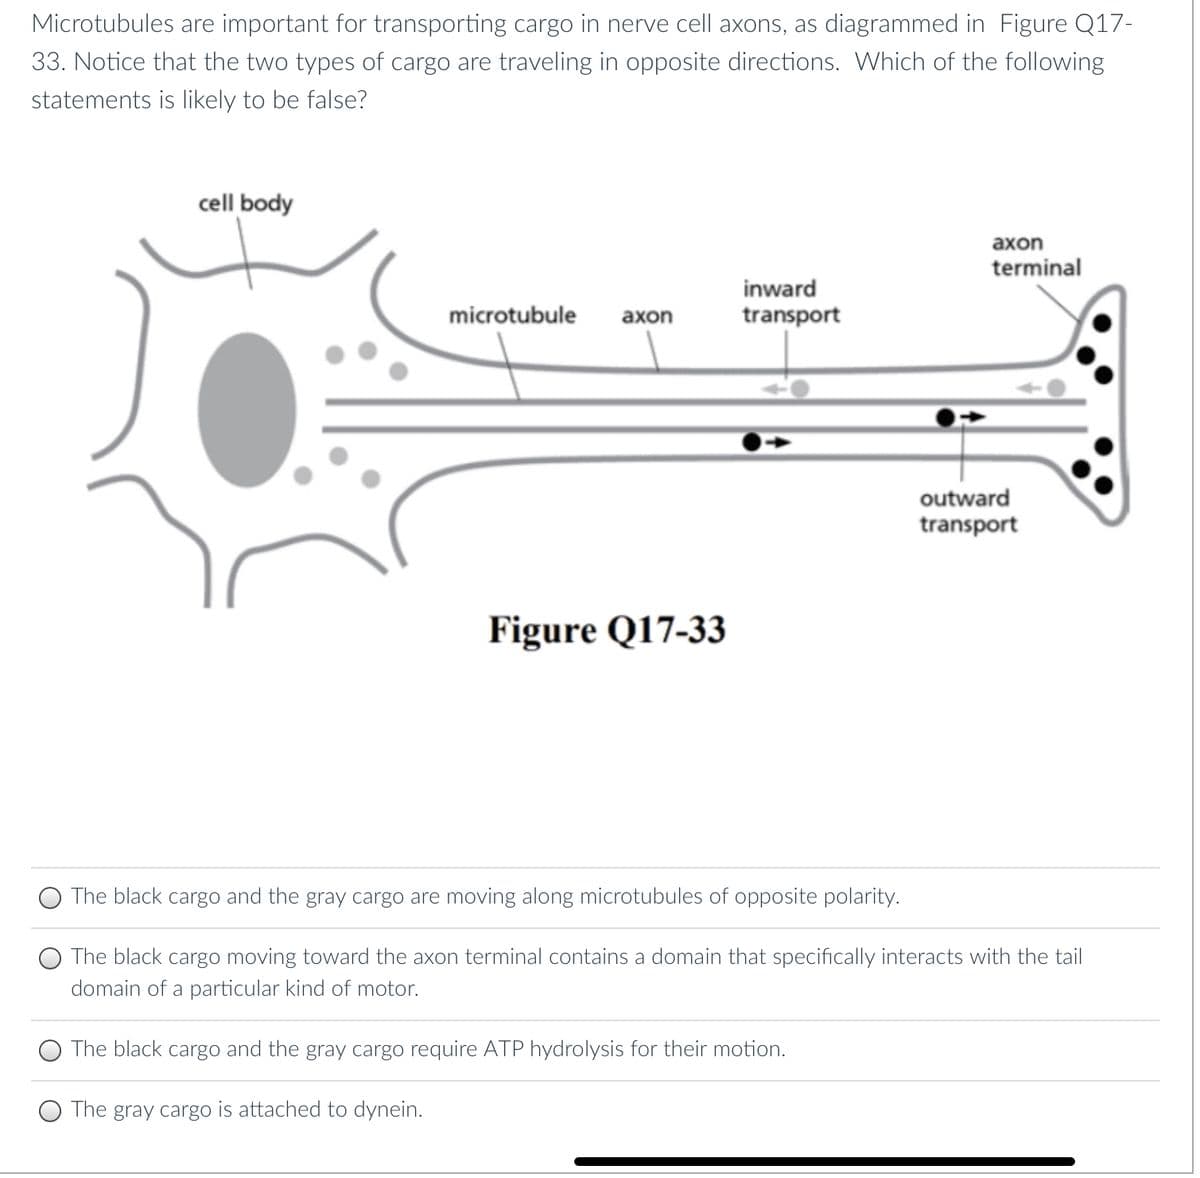 Microtubules are important for transporting cargo in nerve cell axons, as diagrammed in Figure Q17-
33. Notice that the two types of cargo are traveling in opposite directions. Which of the following
statements is likely to be false?
cell body
microtubule
axon
Figure Q17-33
inward
transport
axon
terminal
The black cargo and the gray cargo require ATP hydrolysis for their motion.
The gray cargo is attached to dynein.
outward
transport
The black cargo and the gray cargo are moving along microtubules of opposite polarity.
The black cargo moving toward the axon terminal contains a domain that specifically interacts with the tail
domain of a particular kind of motor.